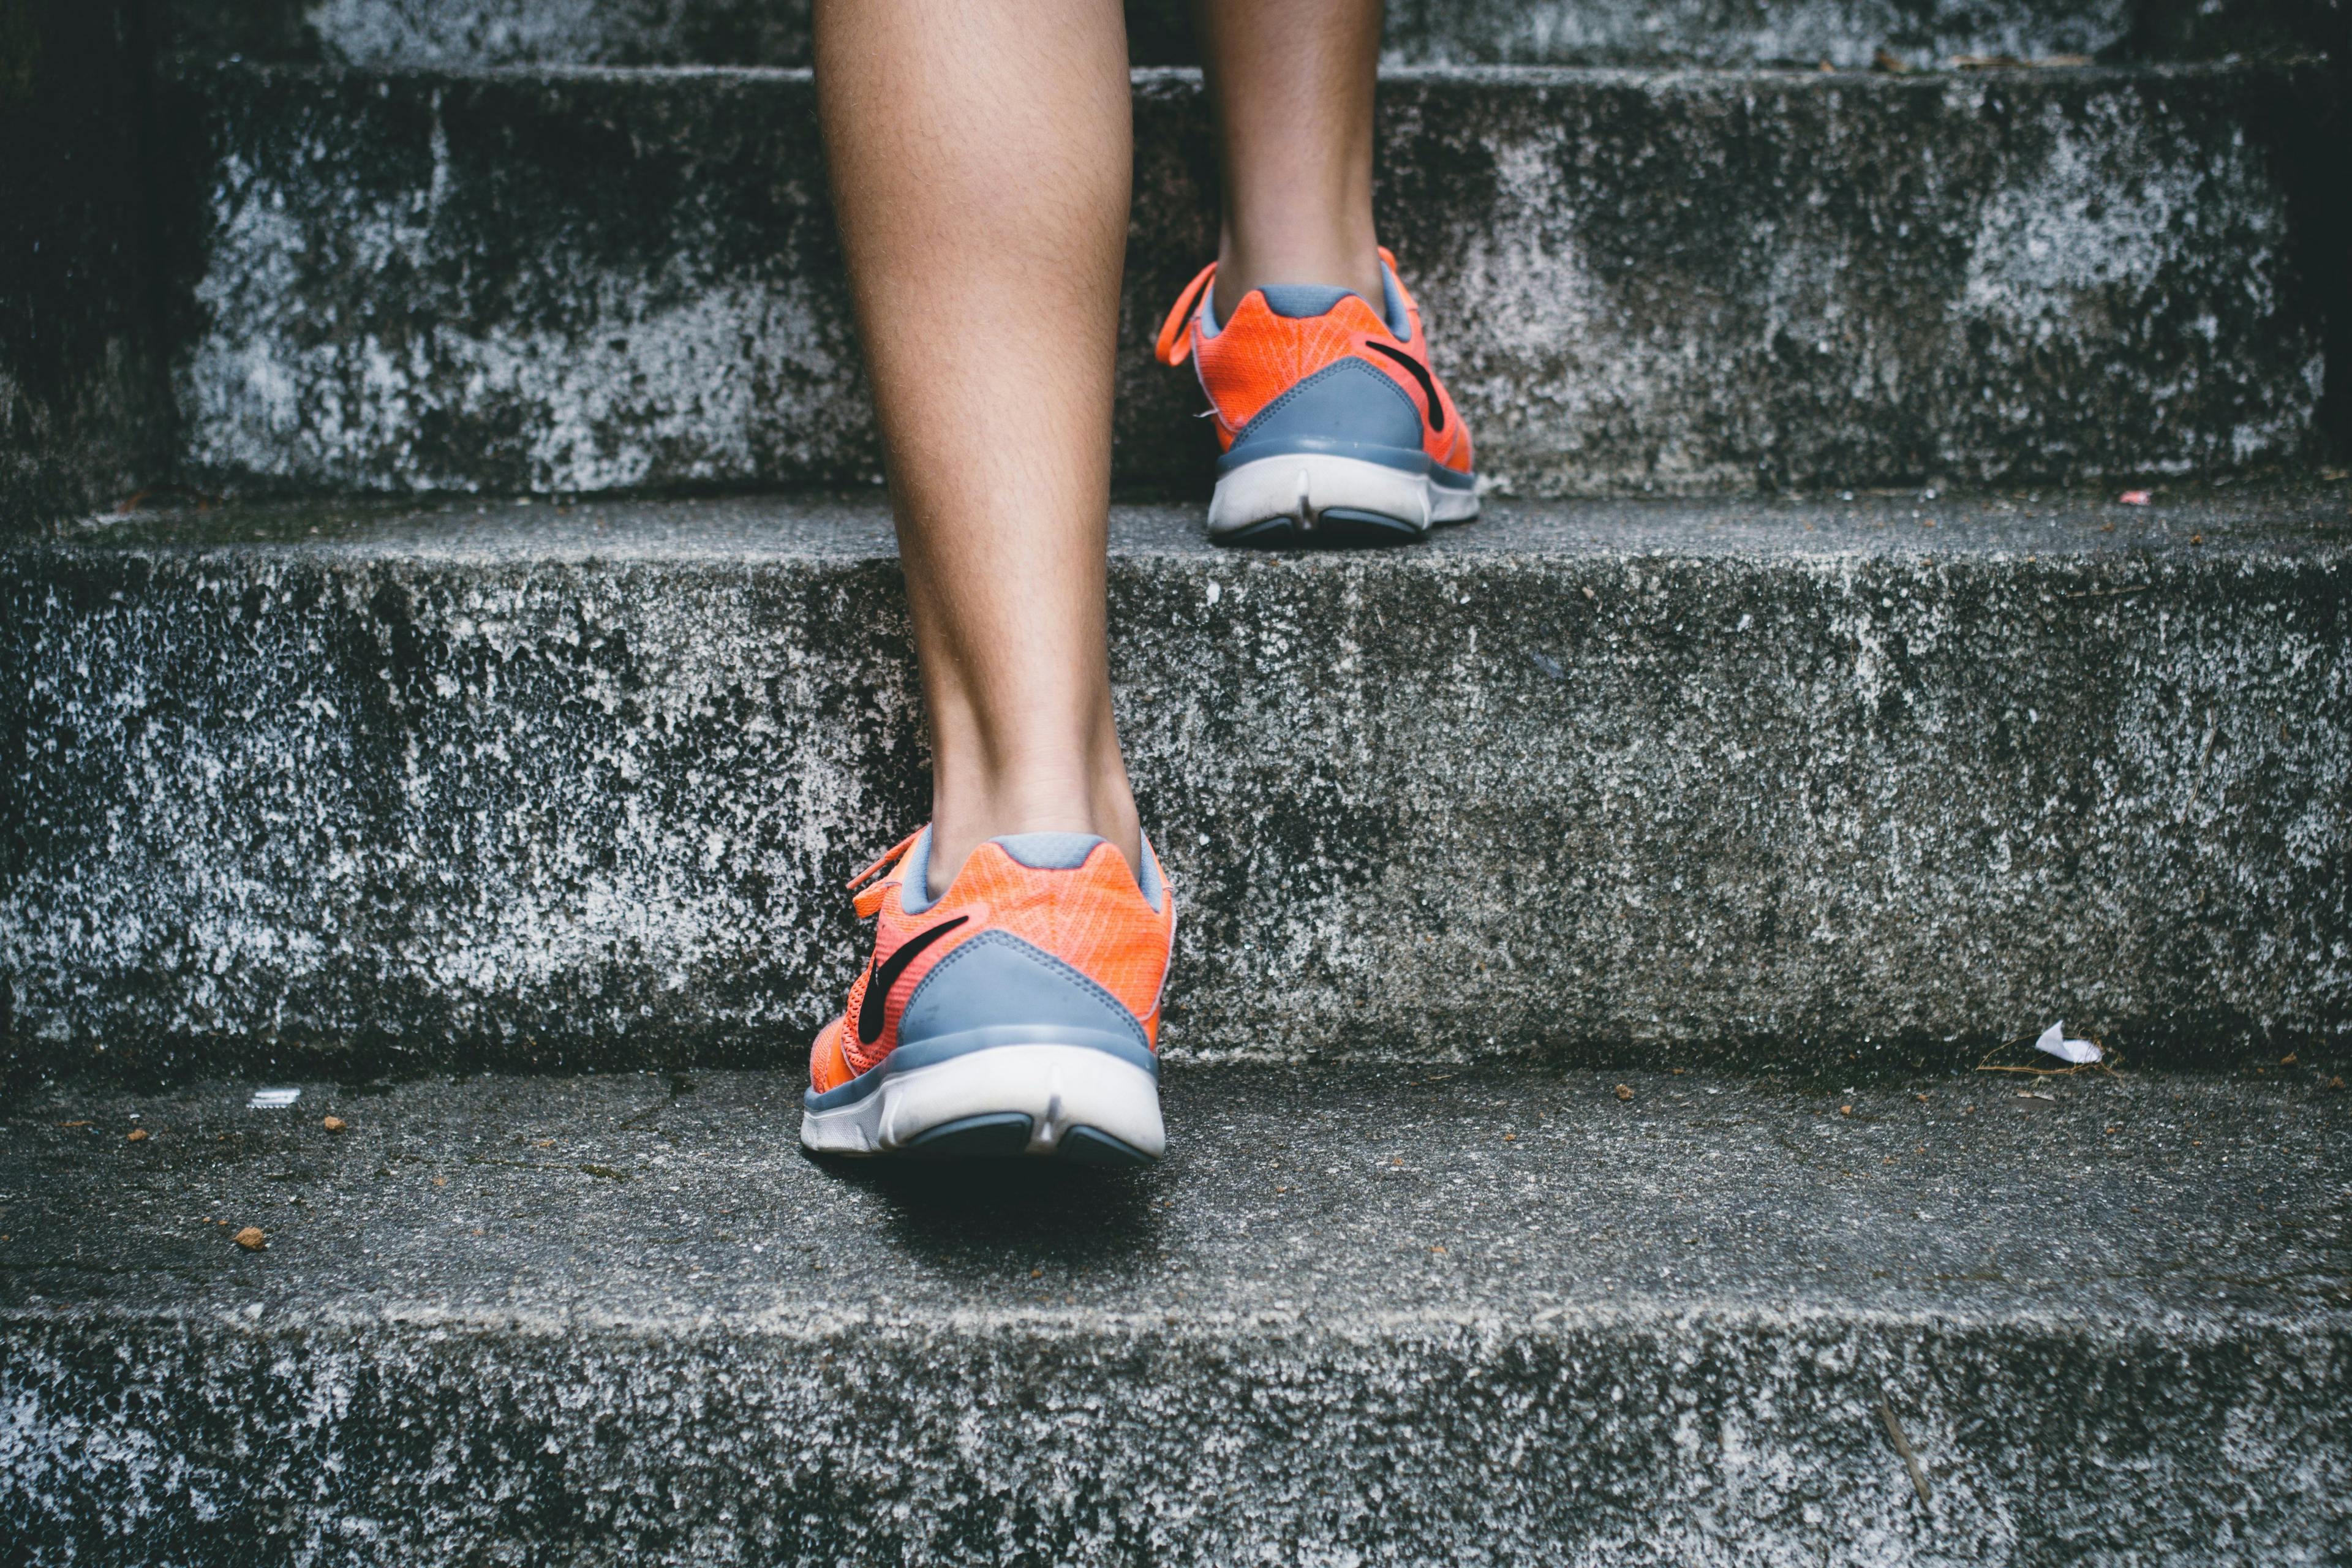 Although Many of Us Don’t Love the Idea of It, Exercise Can Help Reduce the Effects of Lymphedema